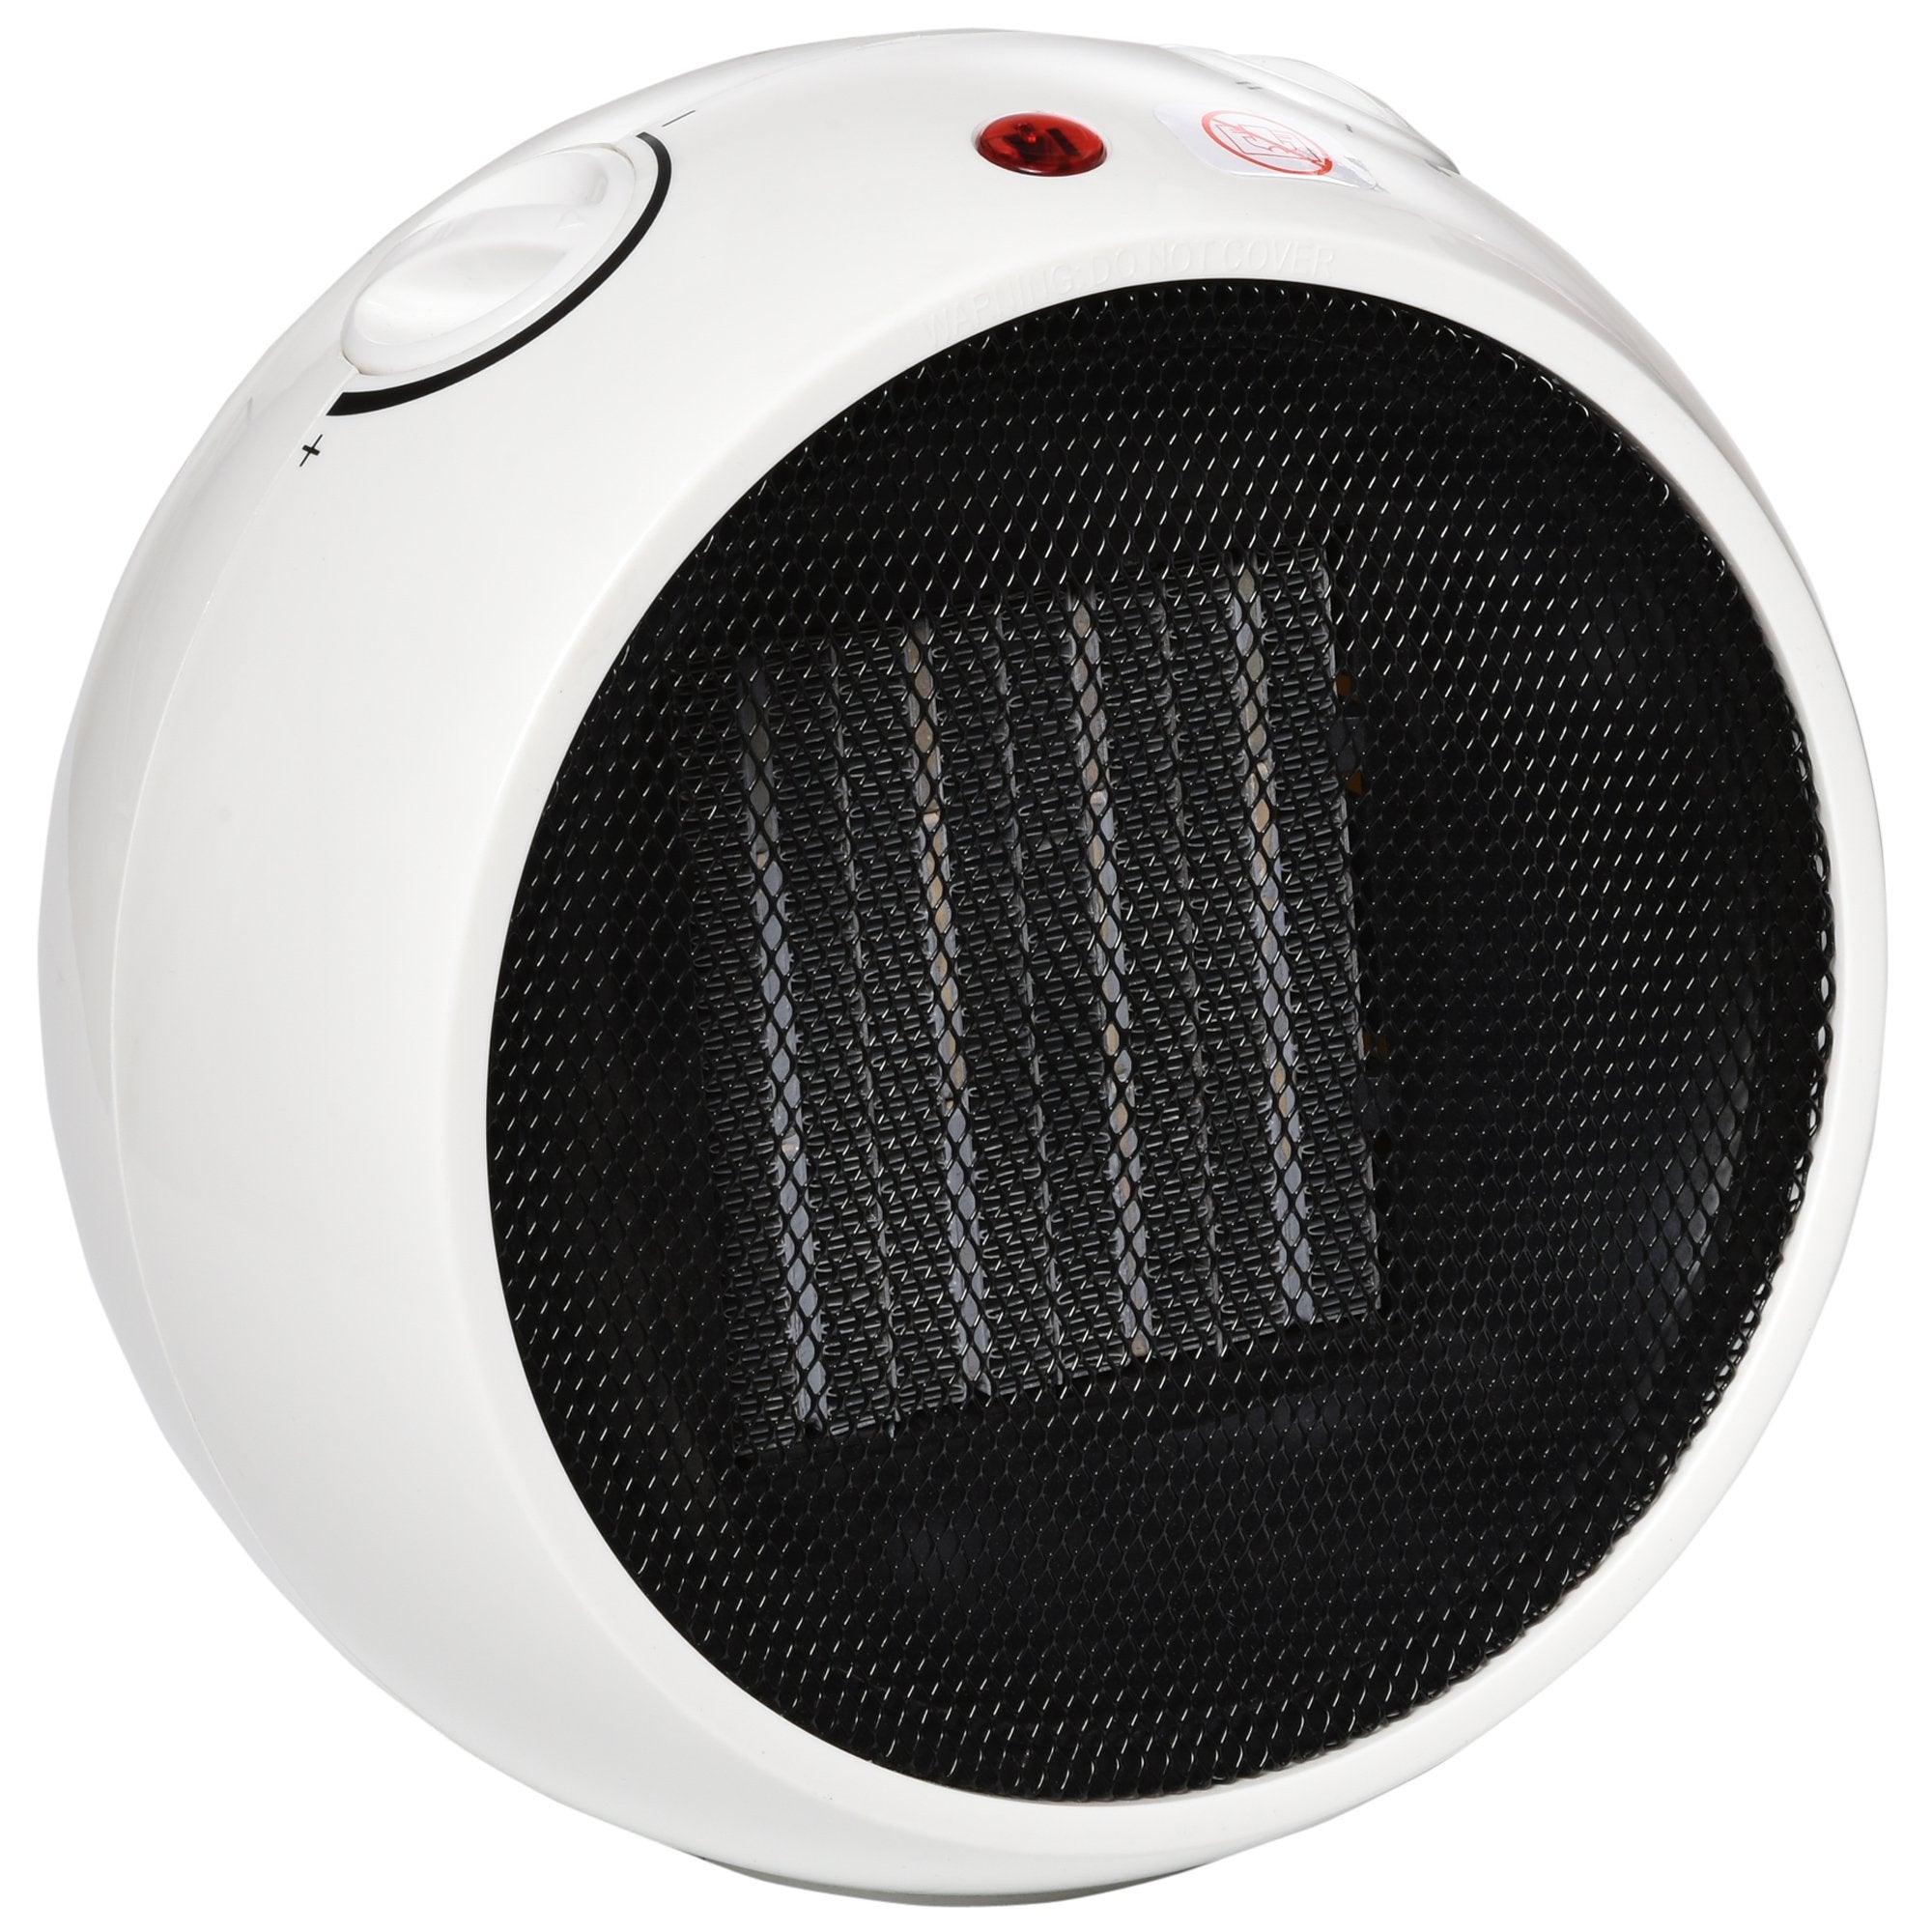 HOMCOM Small Space Ceramic Heater with 3 Heating Modes & Adjustable Temperature